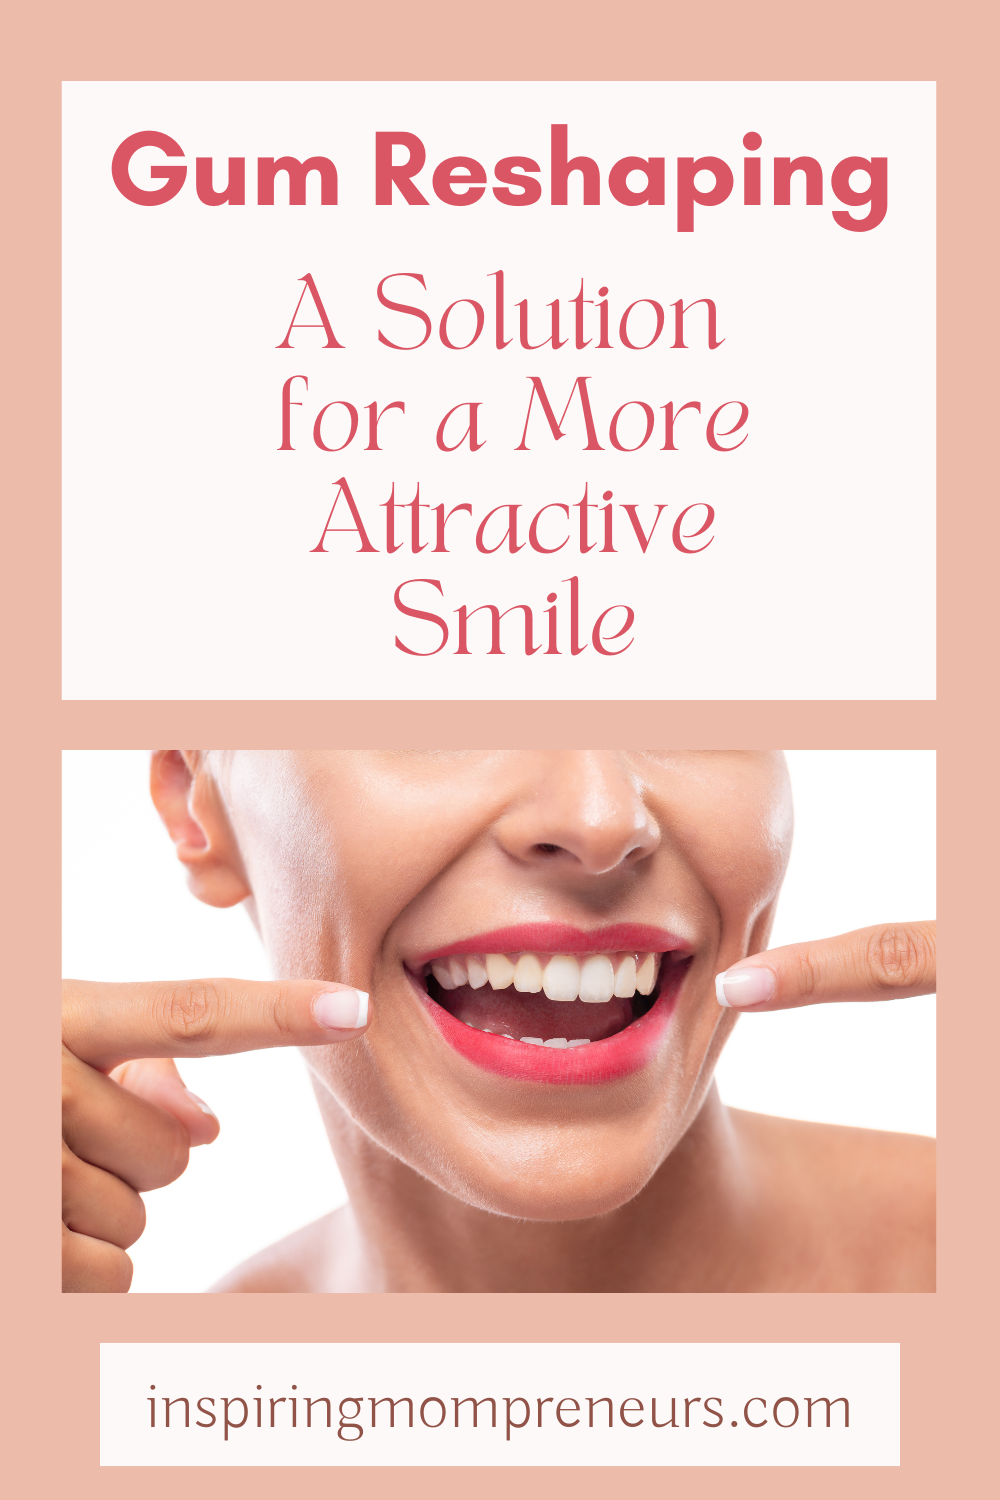 Want a more attractive smile? Gum reshaping may be just the solution you're after. Find out what gum reshaping is and whether it's for you.